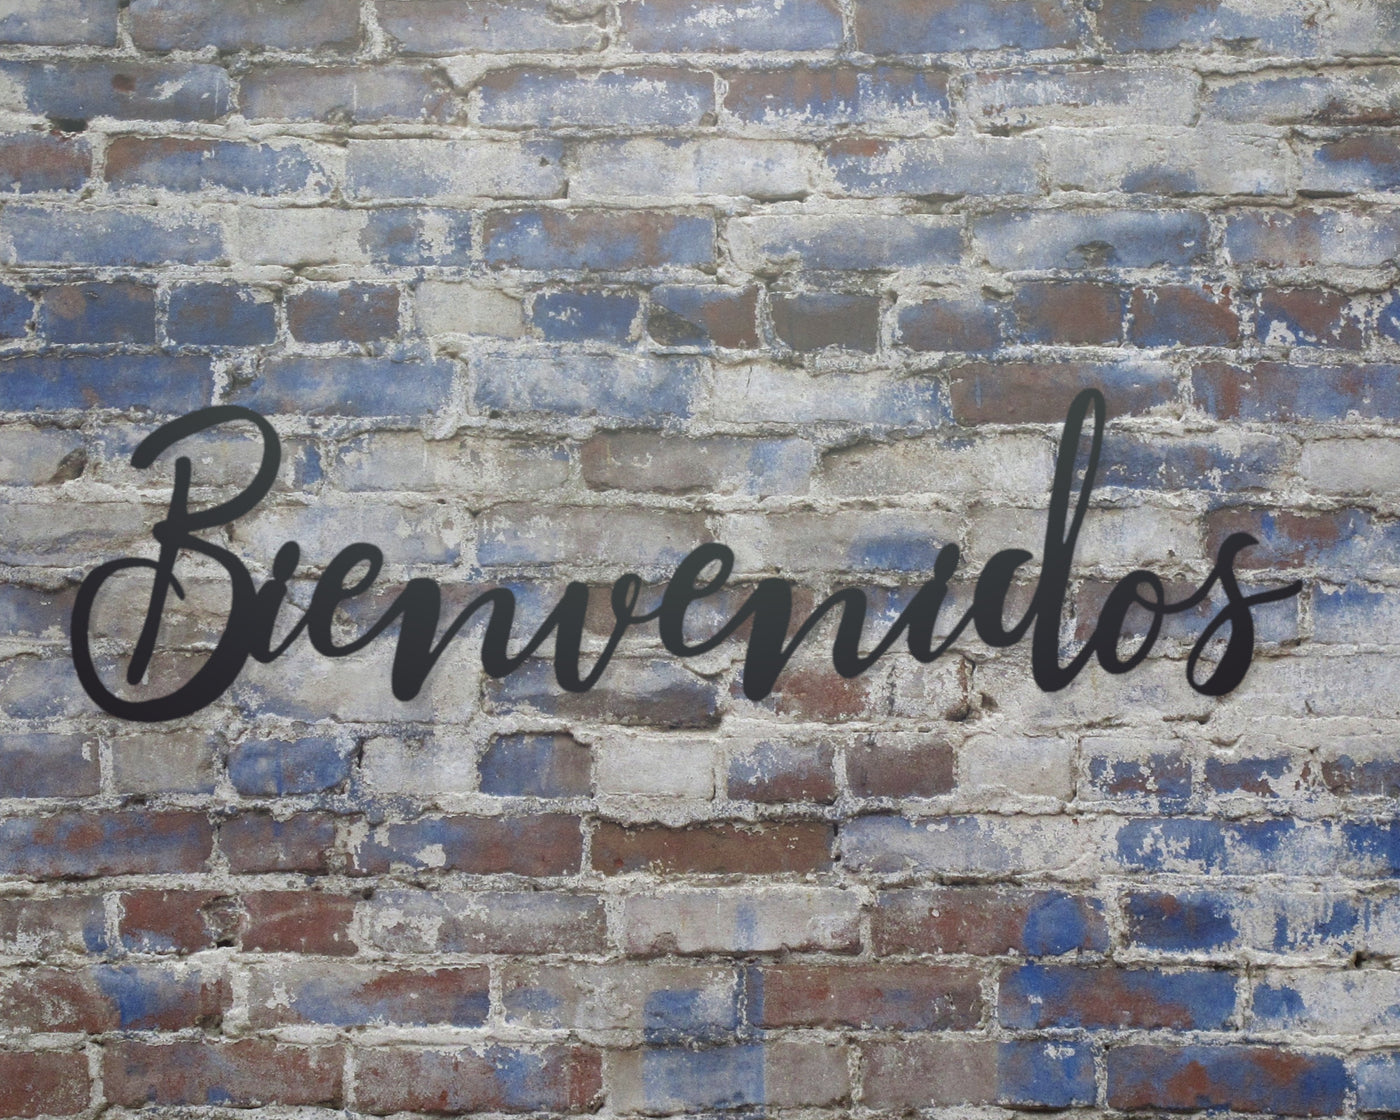 Bienvenidos Metal Word Sign - Madison Iron and Wood - Wall Art - metal outdoor decor - Steel deocrations - american made products - veteran owned business products - fencing decorations - fencing supplies - custom wall decorations - personalized wall signs - steel - decorative post caps - steel post caps - metal post caps - brackets - structural brackets - home improvement - easter - easter decorations - easter gift - easter yard decor